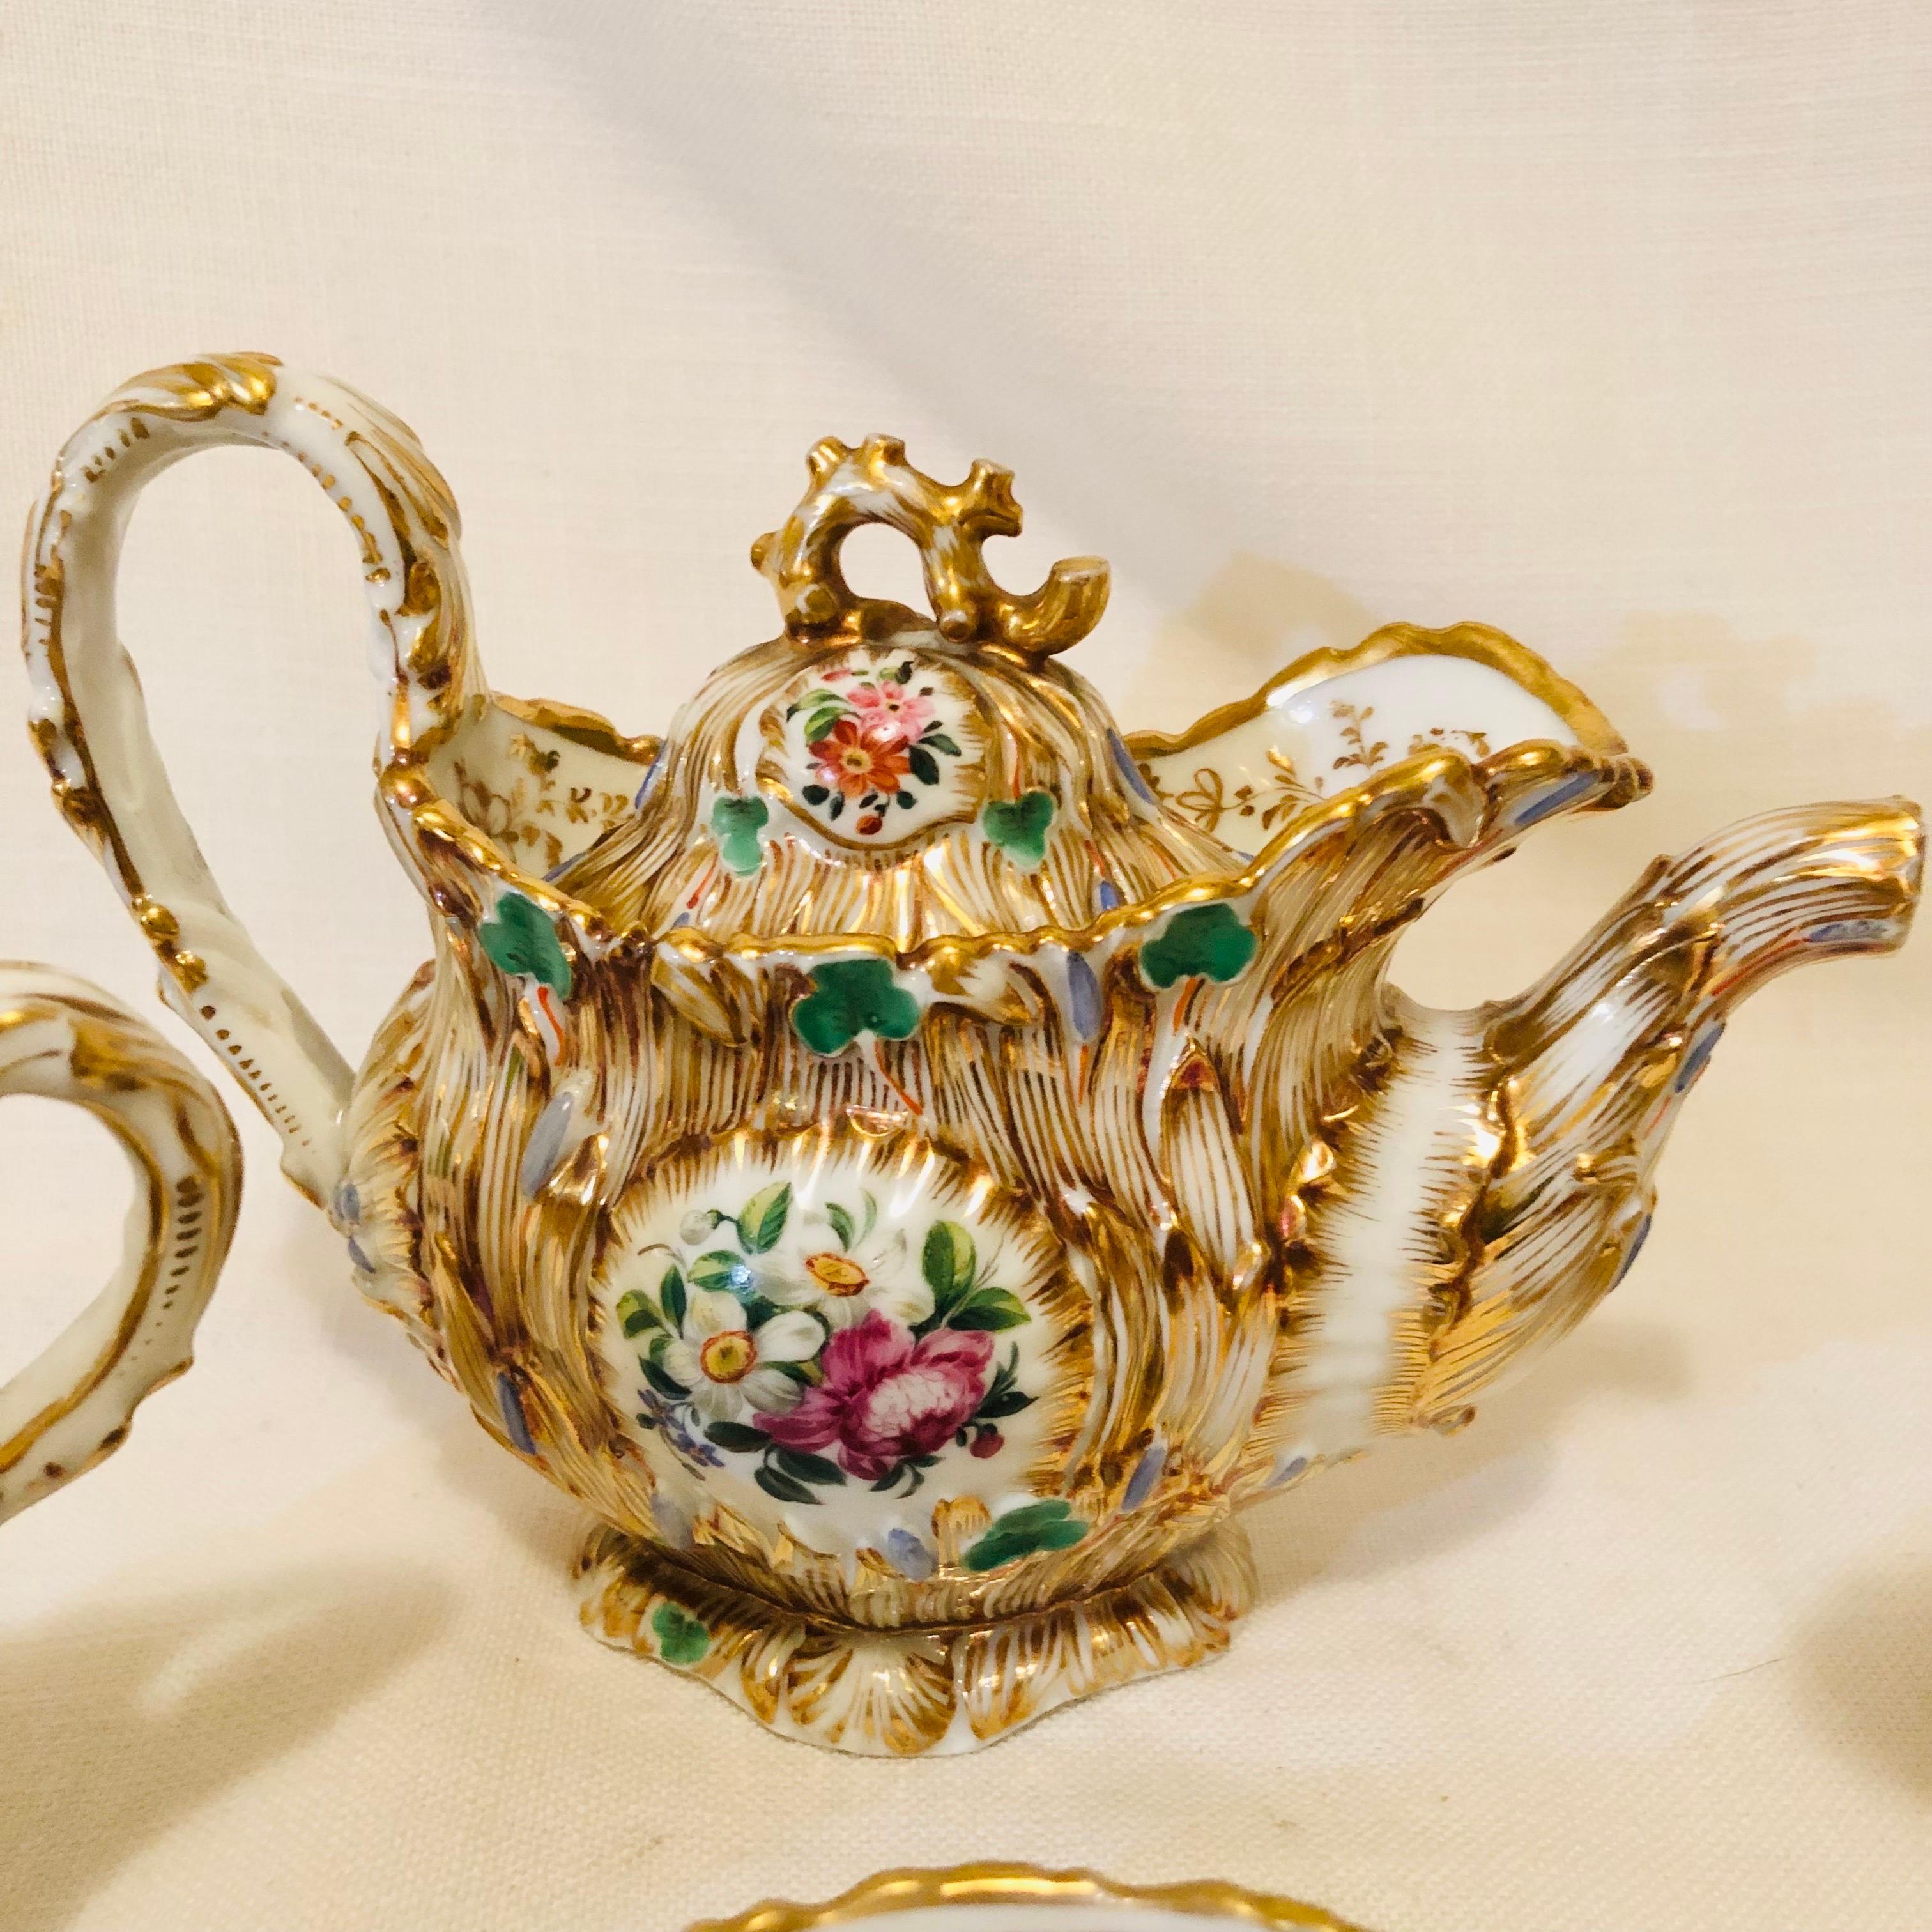 Jacob Petit Paris Porcelain Tea Set with Gilt and Colorful Rococo Decoration In Good Condition For Sale In Boston, MA